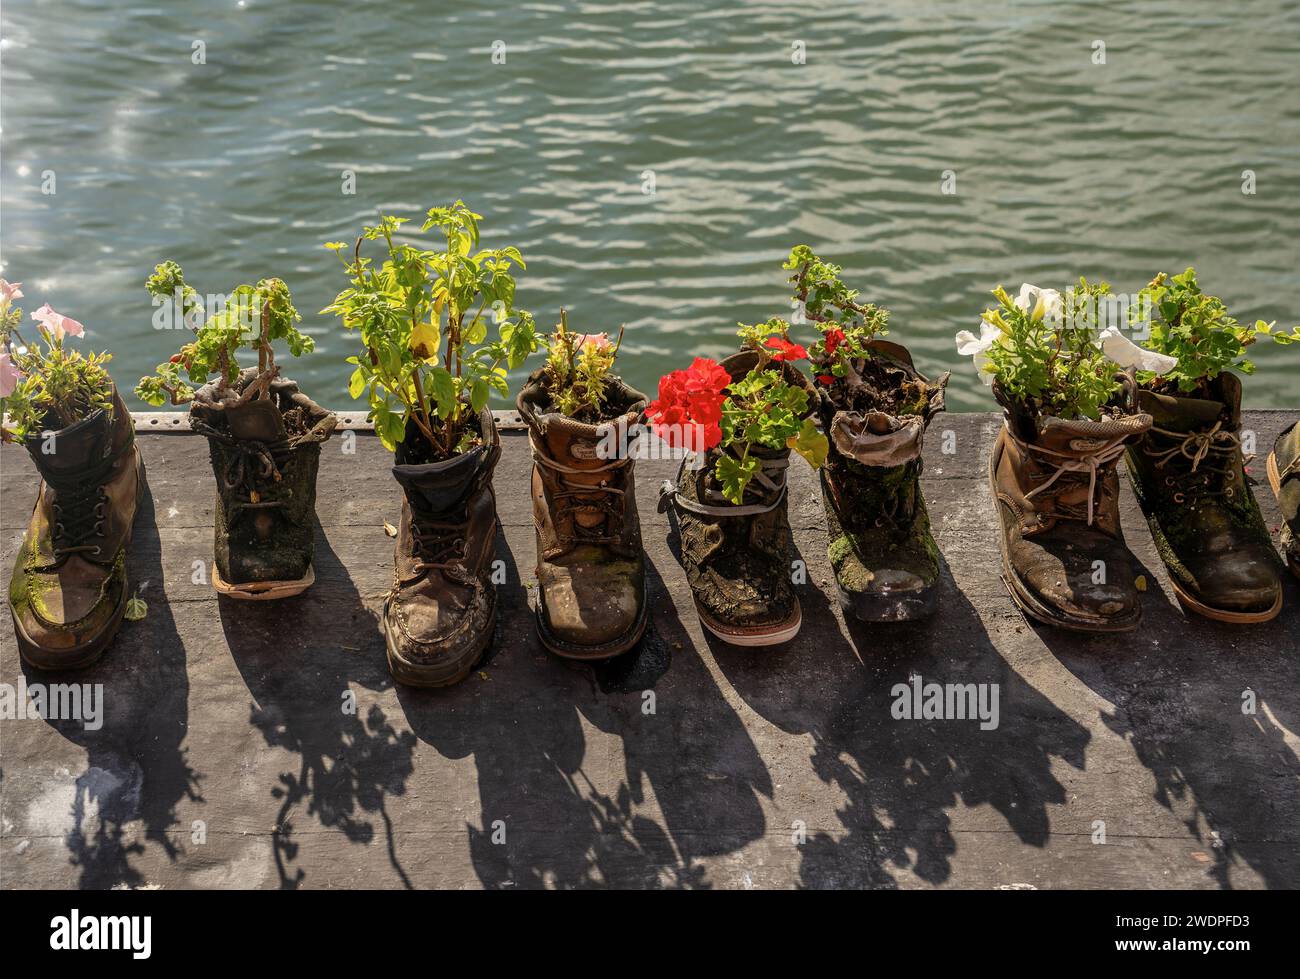 garden plants planted in boots and shoe containers Stock Photo